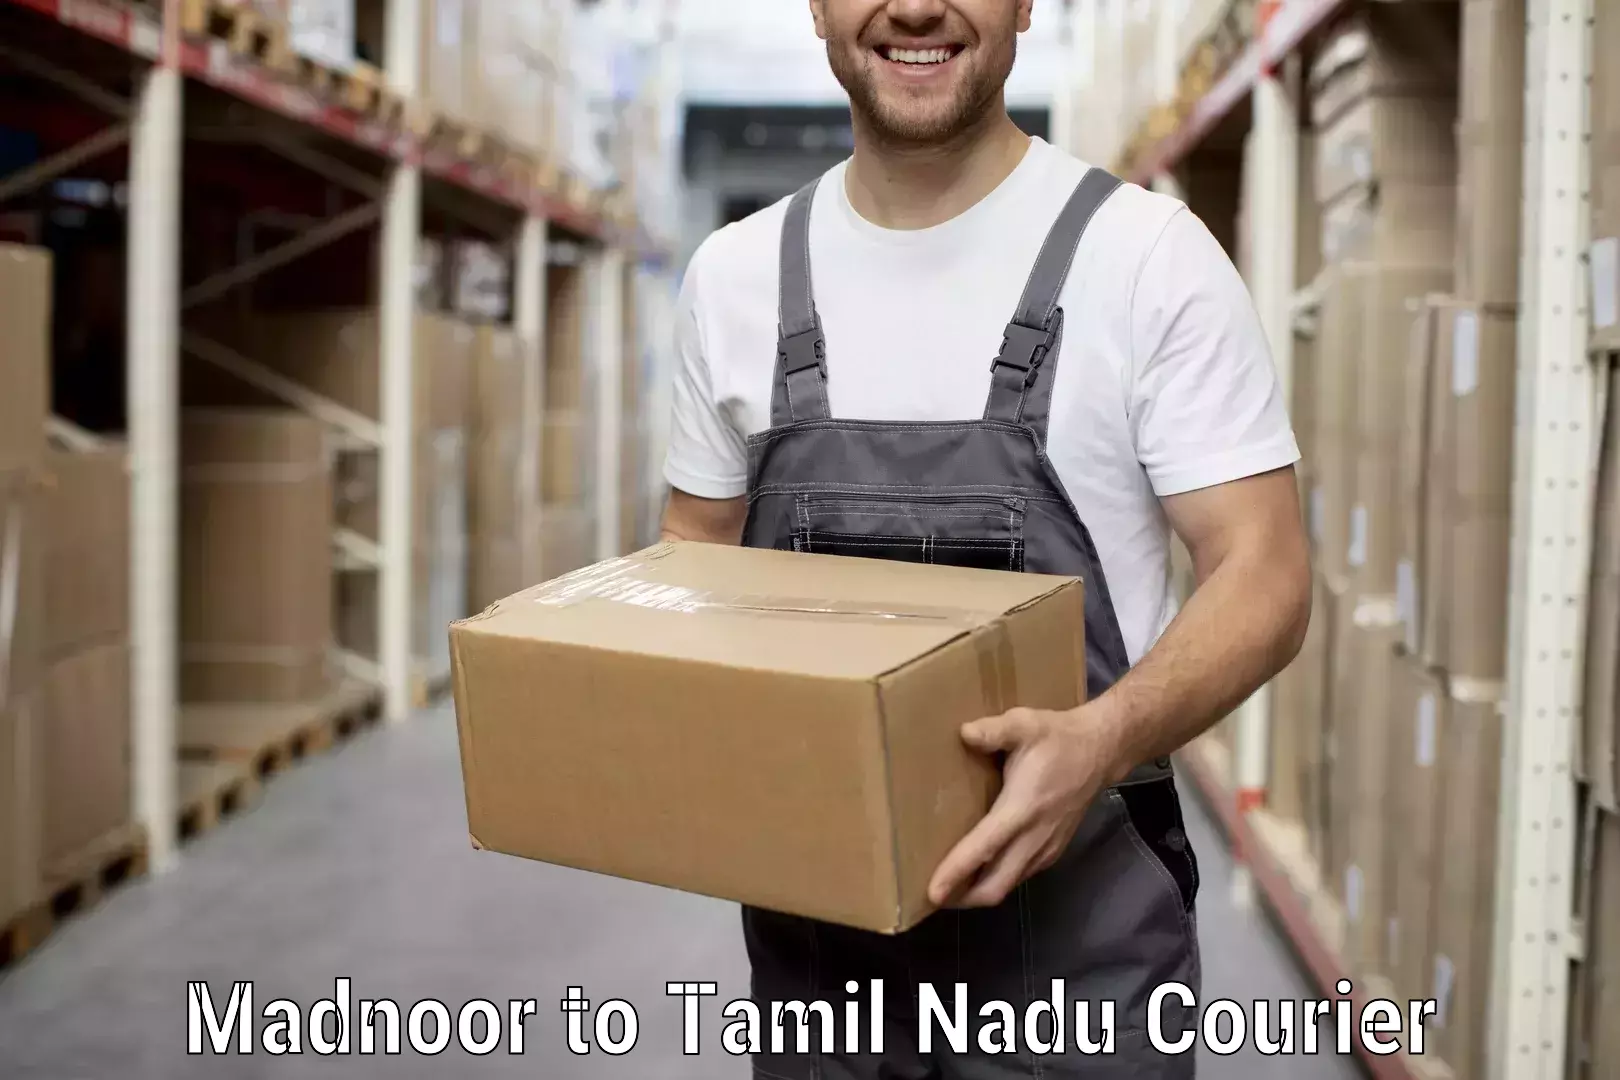 Trusted household movers Madnoor to Anthiyur